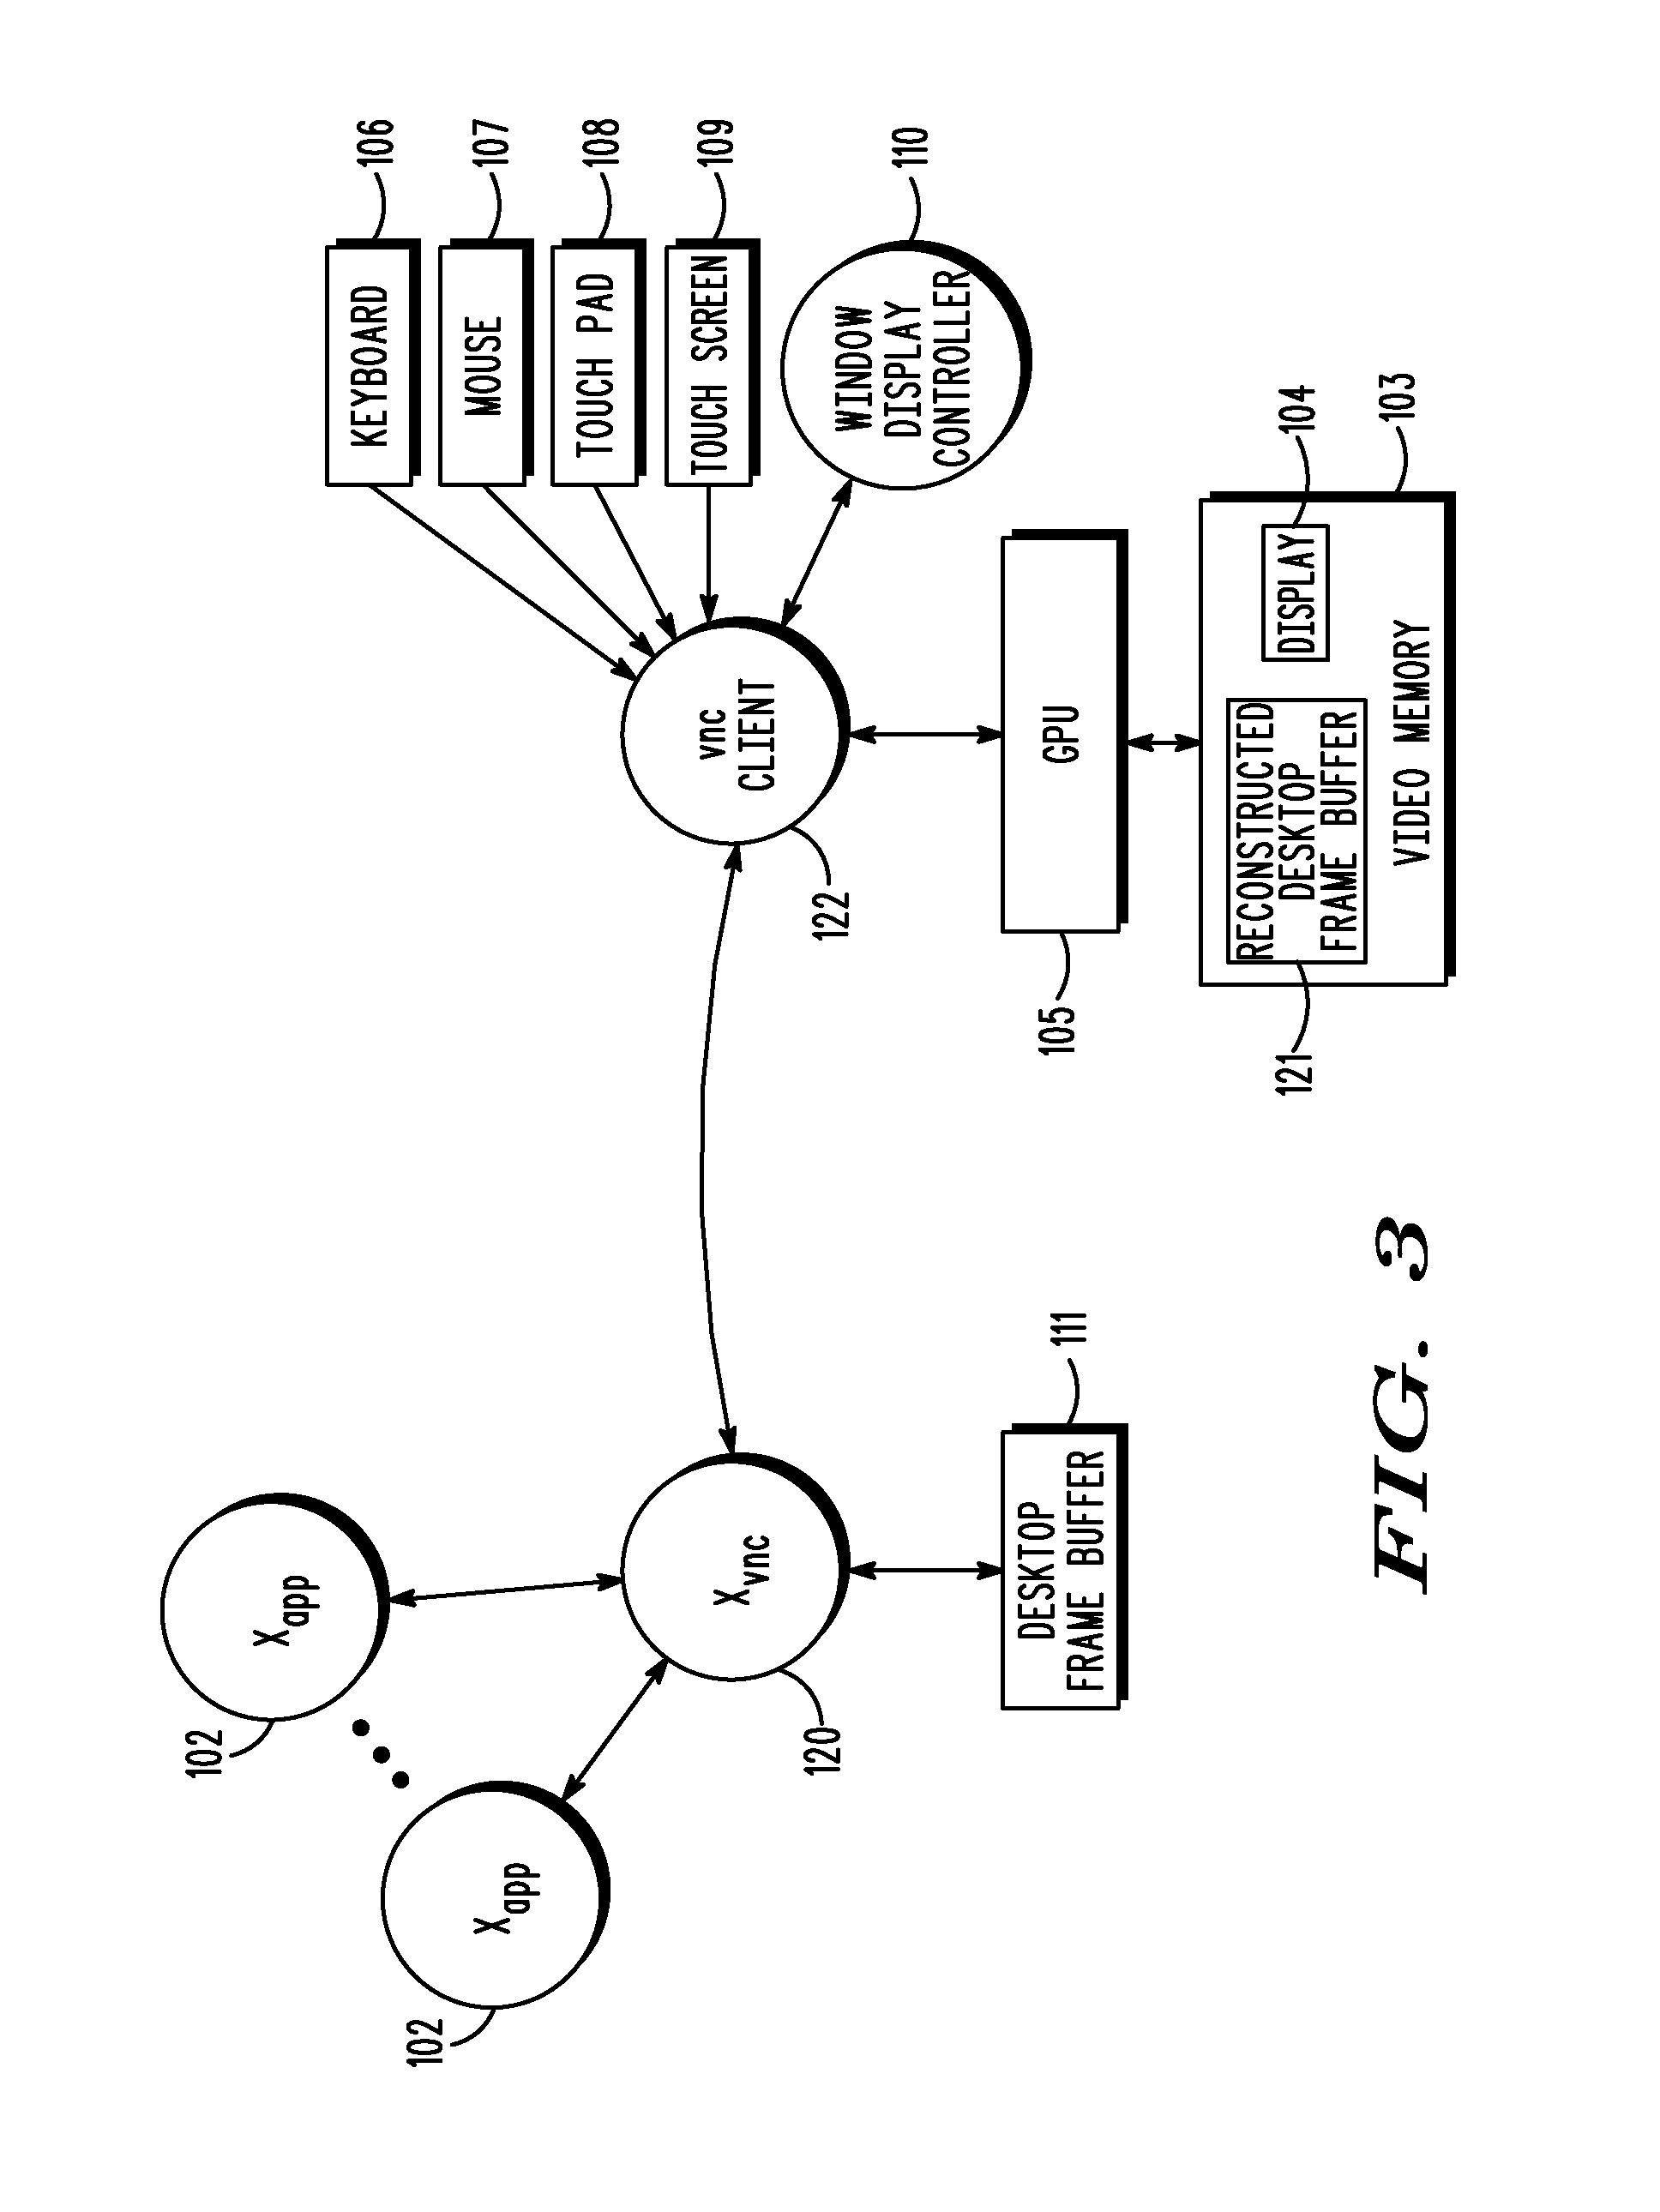 System for conveying and reproducing images for interactive applications